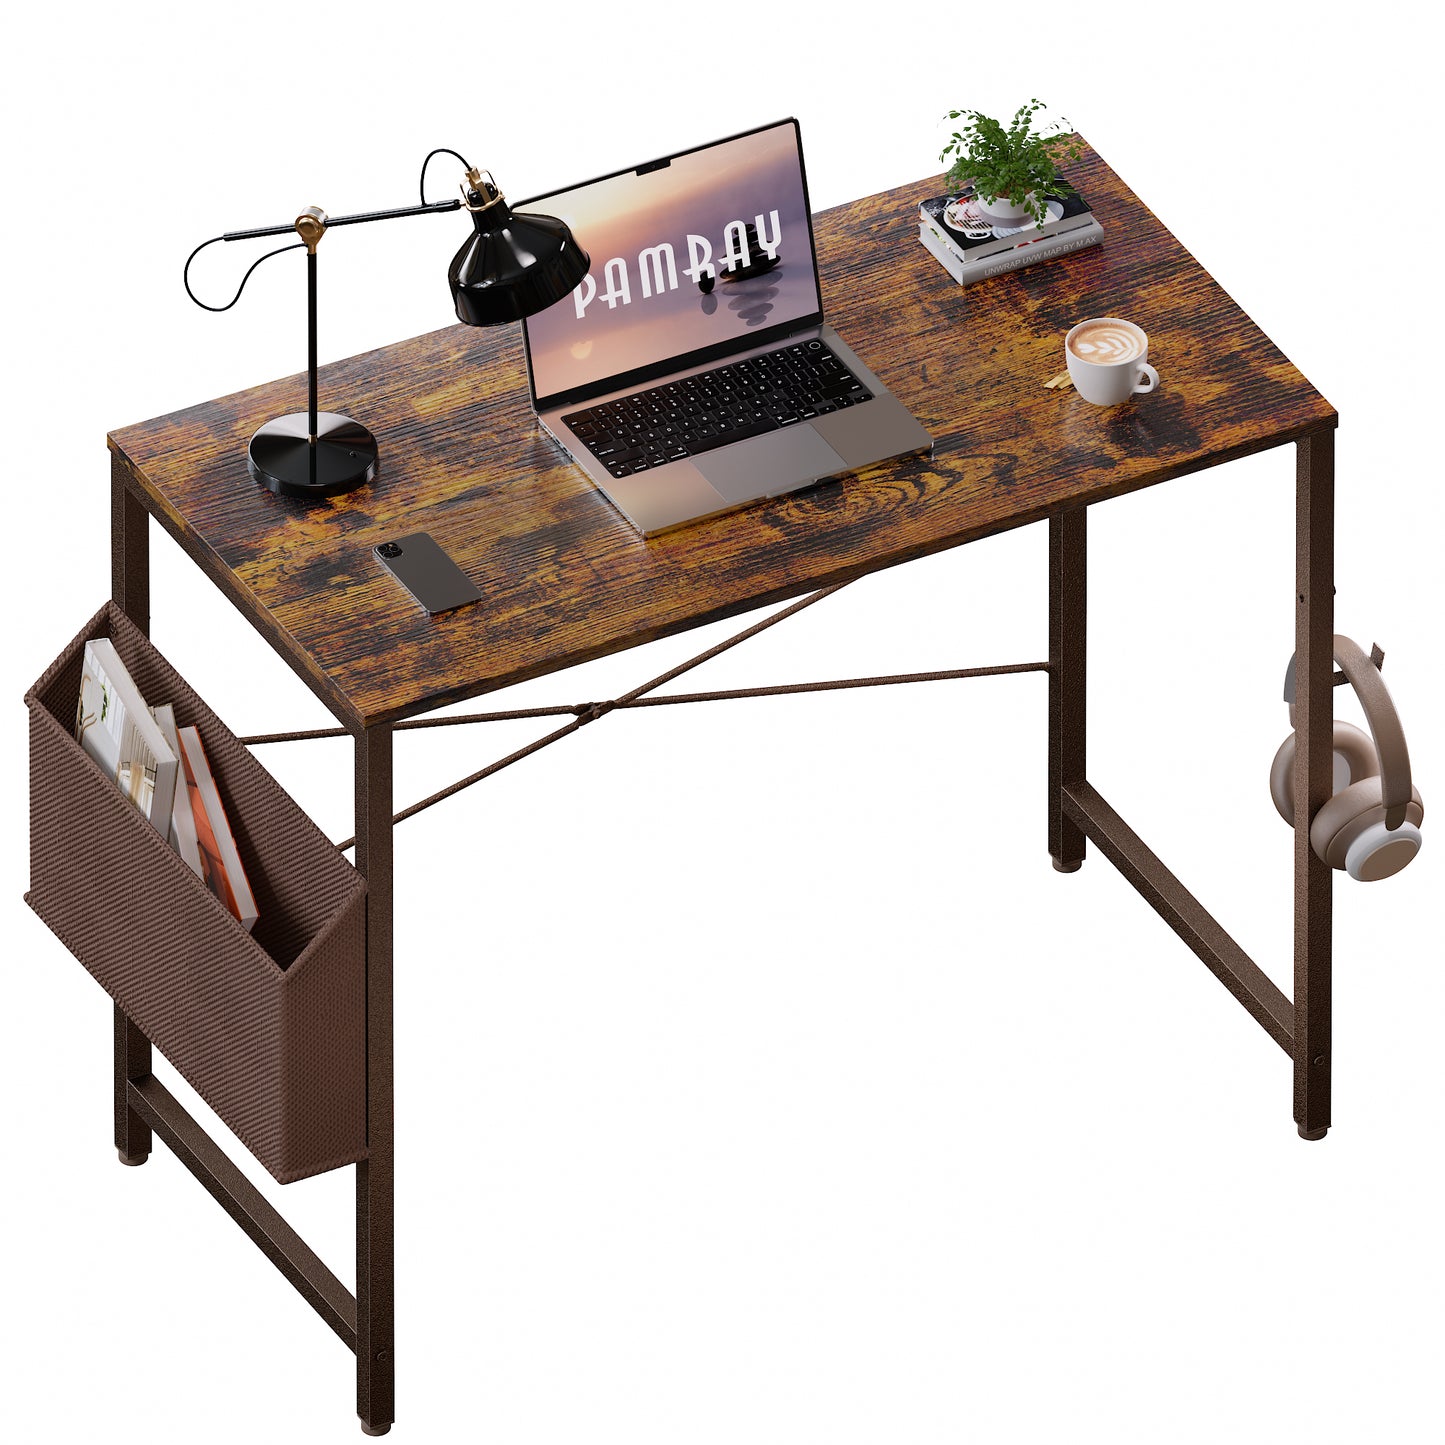 Pamray 32 Inch Computer Desk for Small Spaces with Storage Bag, Home Office Work Desk with Headphone Hook